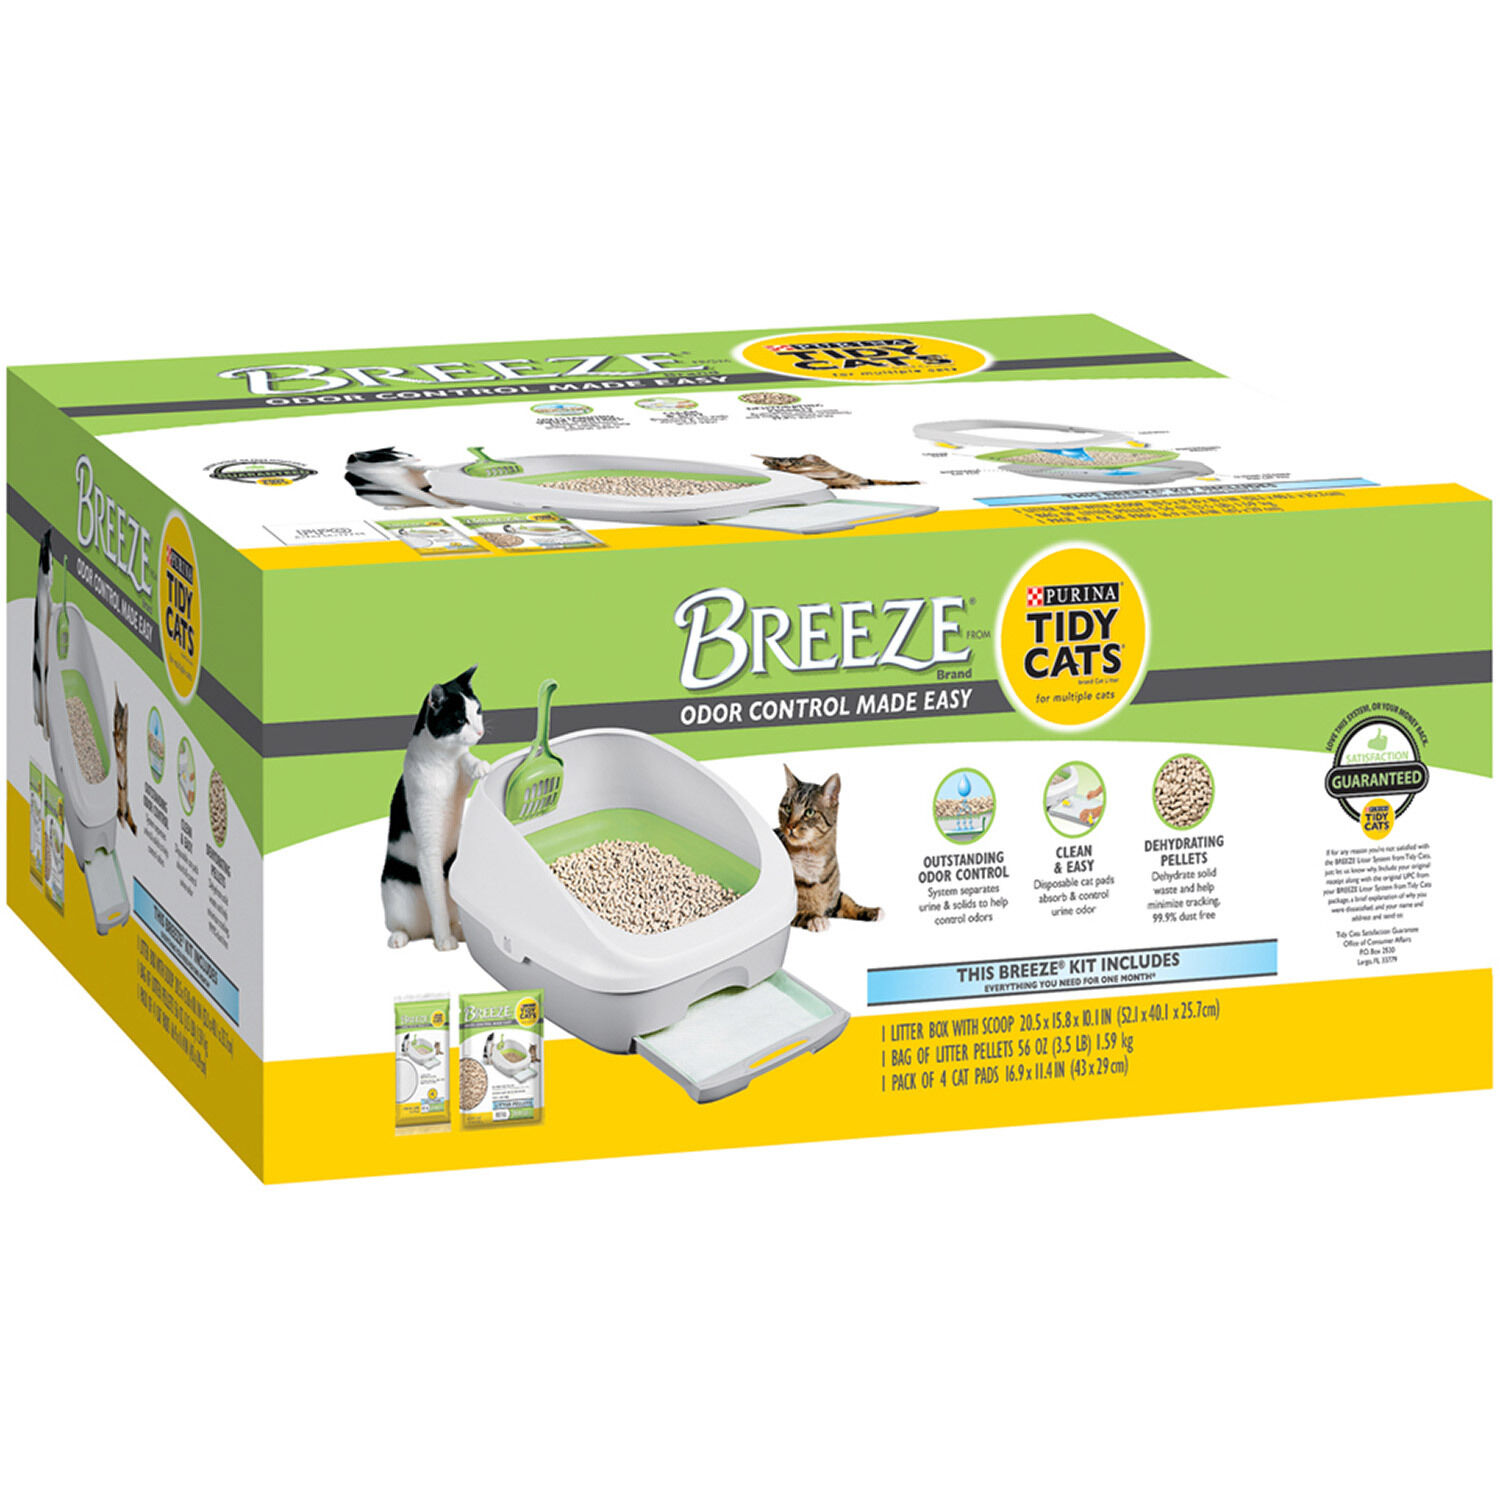 Tidy Cats Breeze Cat Litter System Starter Kit | 1 ea Change the way you think about cleaning your cat's litter box with the Purina Tidy Cats BREEZE Litter System starter kit. This system features powerful odor control to keep your house smelling fresh and clean, and the specially designed, cat-friendly litter pellets minimize your pets from tracking litter throughout your home. With the pass-through automatic litter box system, the pellets capture solid waste on top, letting urine pass through to the absorbent litter pads below. This easy-to-maintain system takes the guesswork out of changing litter while giving your cats a comfortable place to seek relief. A protective drawer holds the cat pads for litter box use securely in place, keeping them away from your cats while they use the BREEZE litter box. The Purina Tidy Cats BREEZE Litter System starter kit comes with everything you need to get your cats started on this convenient and odor-controlling all-in-one cat litter system. Simple Setup and Maintenance 1. Snap the sidewall onto the grated base. 2. Place a cat pad (soft side up) in the BREEZE litter system drawer and side into the base 3. Fill the top portion of the box with one package of litter pellets. 4. Scoop out solid waste and dispose of daily. Expert Tips Be patient. BREEZE Litter System is very different from traditional litter boxes, and some cats may take longer than others to make the switch. Don't force your cats into the BREEZE box as this could frighten them. Let them explore on their own. It's important they make the choice to use it. Set up BREEZE right beside their previous box. Putting it in the same location helps minimize the change your cats are experiencing. Give your cats space. Let them explore the new box on their own. Even cats prefer a little privacy when they are doing their business! Animal behaviorists recommend multiple cat households have multiple litter boxes: one system per cat, plus one additional system (2 cats = 3 litter systems). Note: Pellets do not clump. 5. Add more pellet